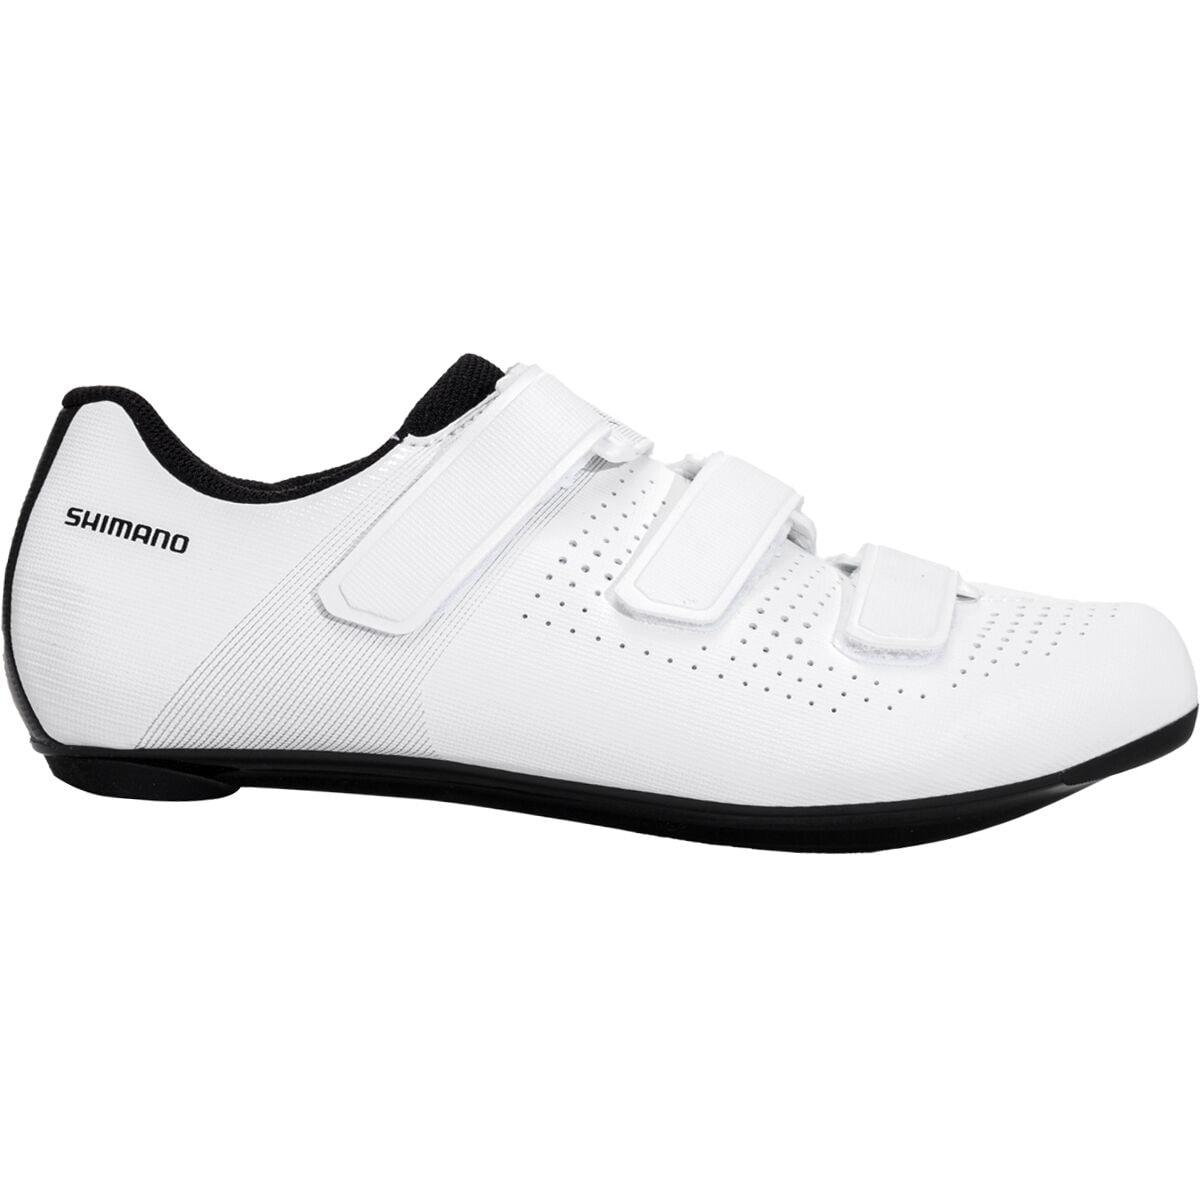 Shimano Rc1 Limited Edition Cycling Shoe in White for Men Lyst